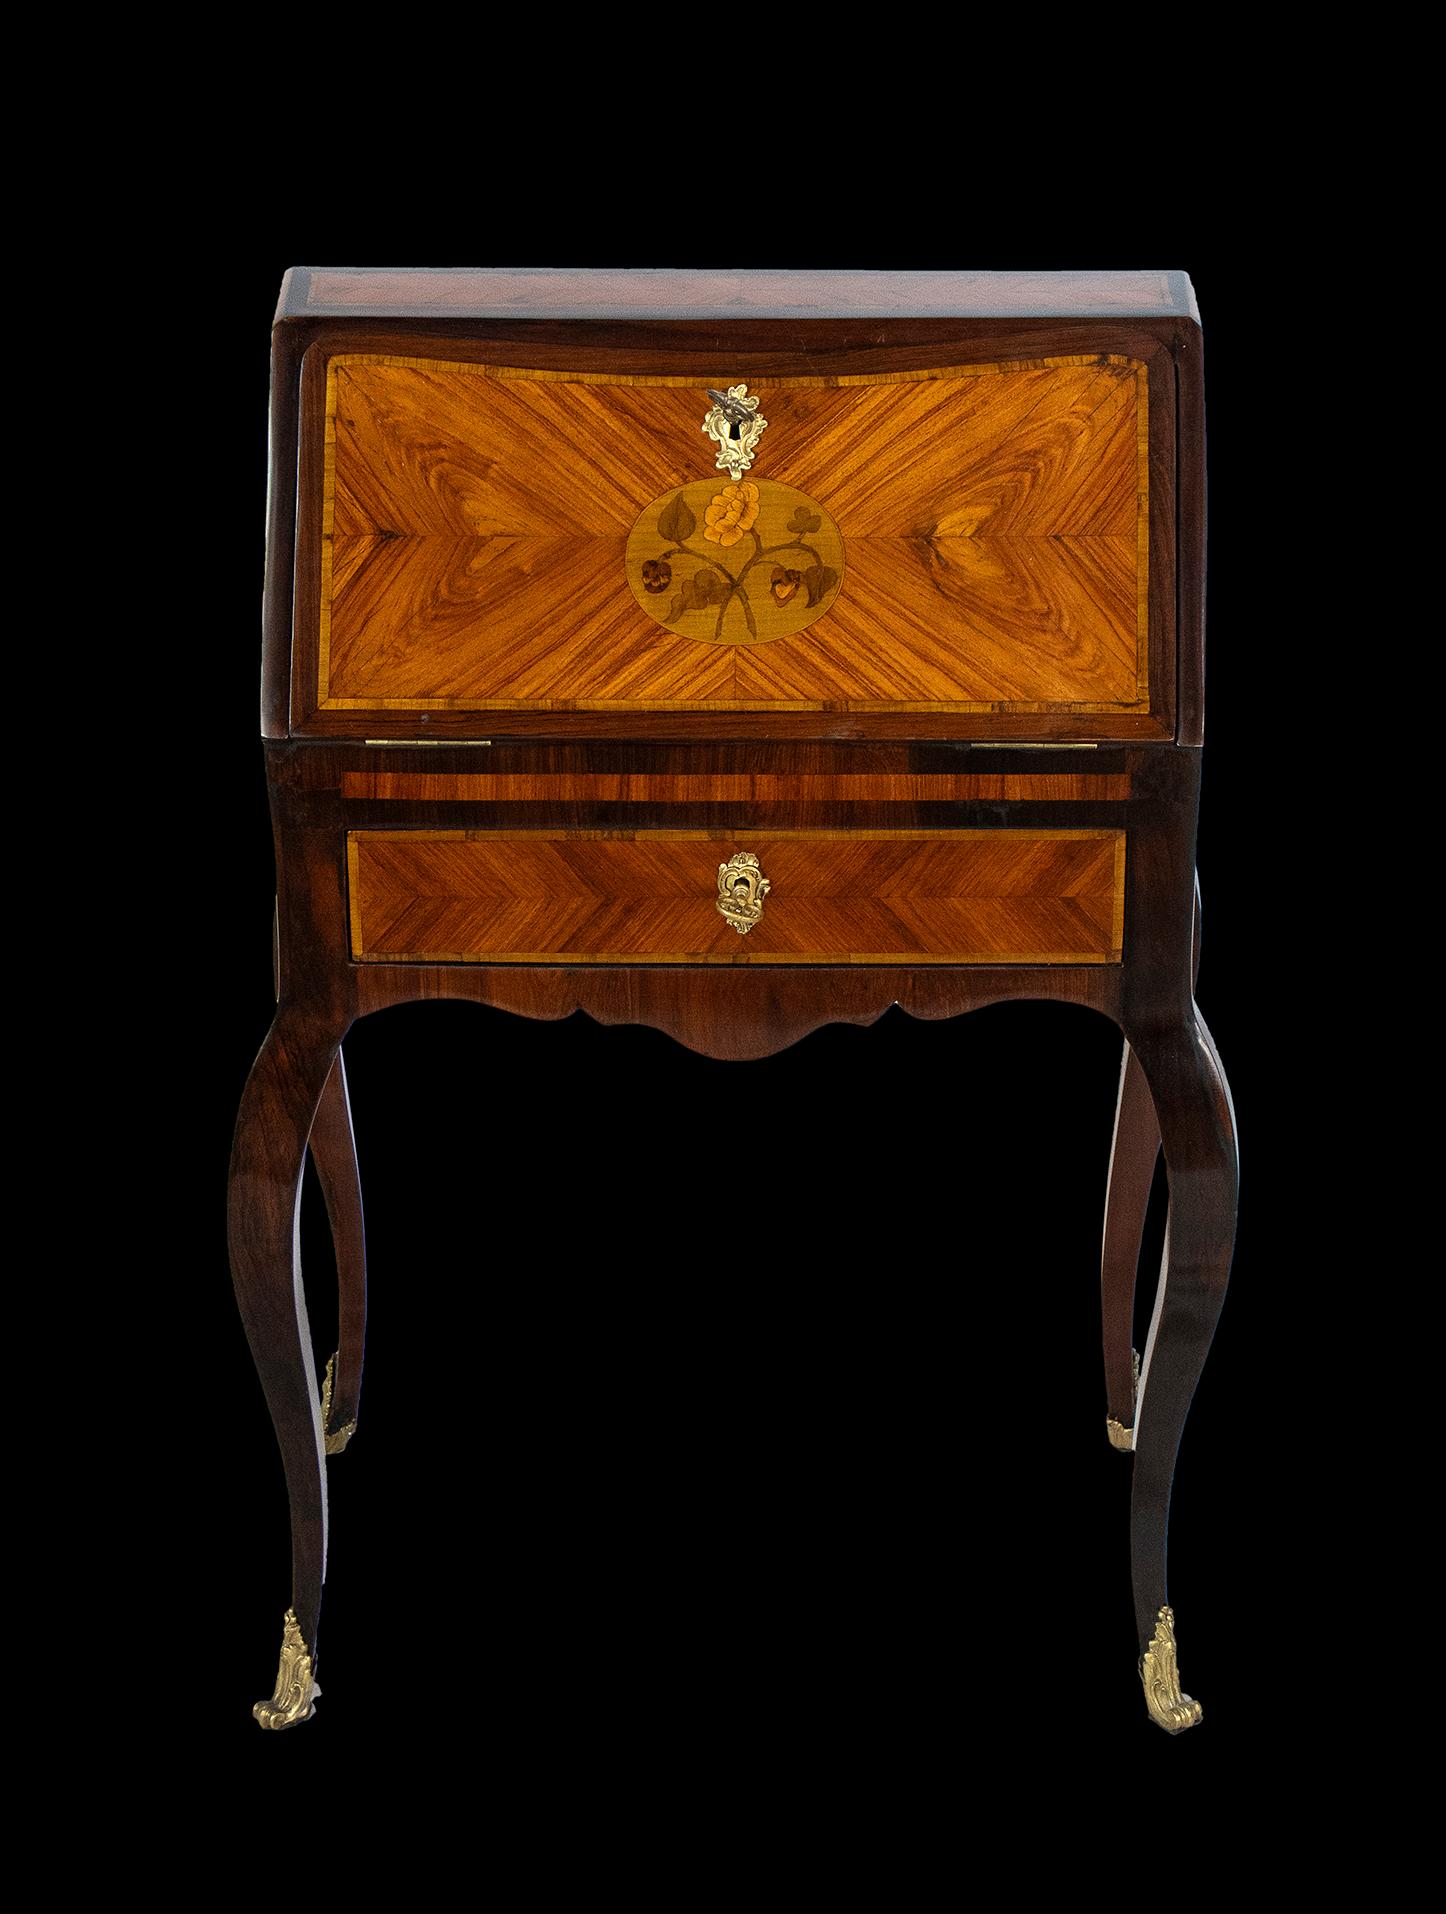 Very rare French chest-shaped, centerpiece bureau in purple ebony wood with mercury-gilt bronze appliqués.
Furniture of rare beauty by the finest French craftsmen of the period. A piece of furniture with a graceful form of rare beauty, the